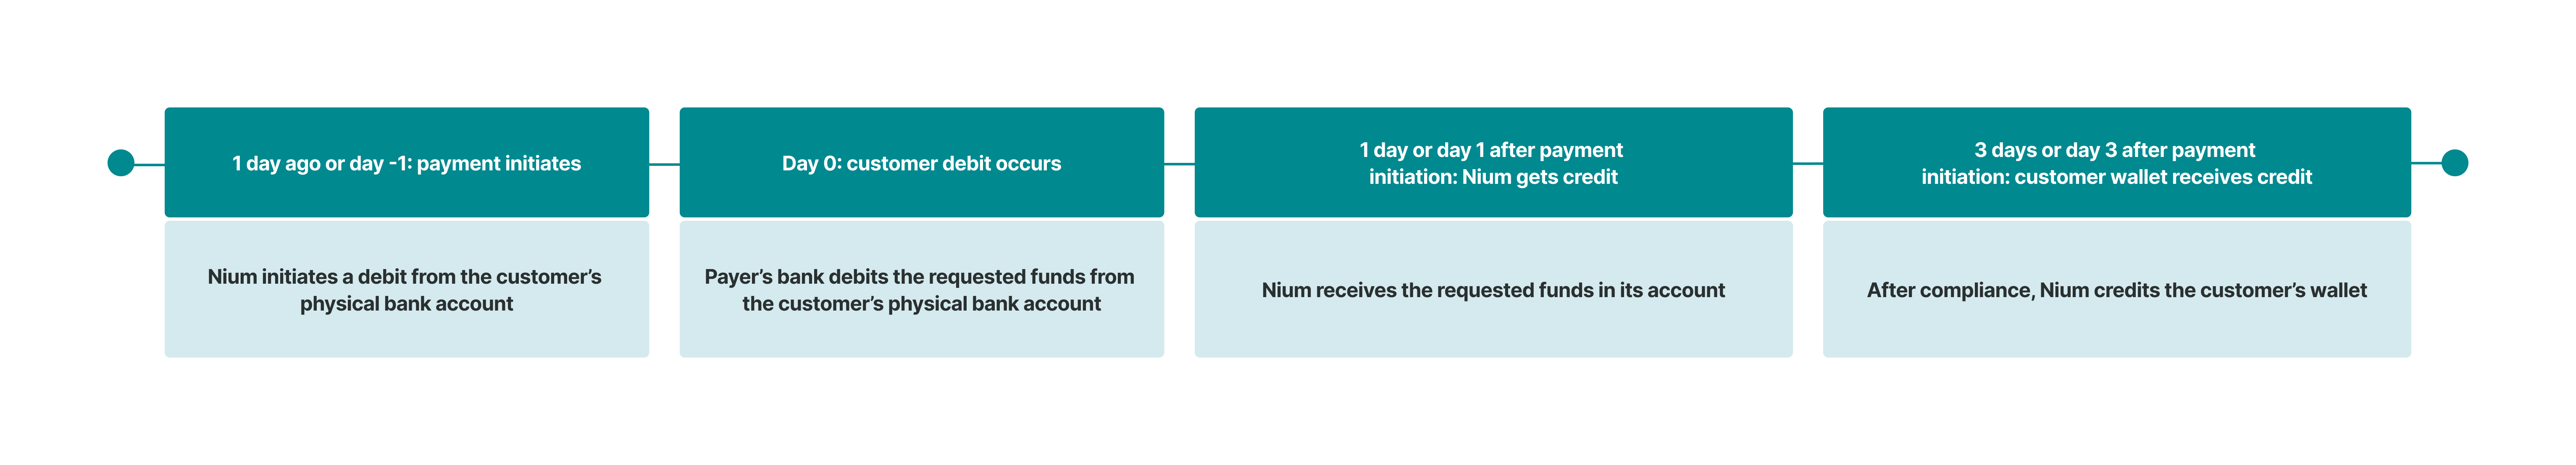 A diagram showing the settlement timing for ACH Direct Debit, which takes the standard 4 days.